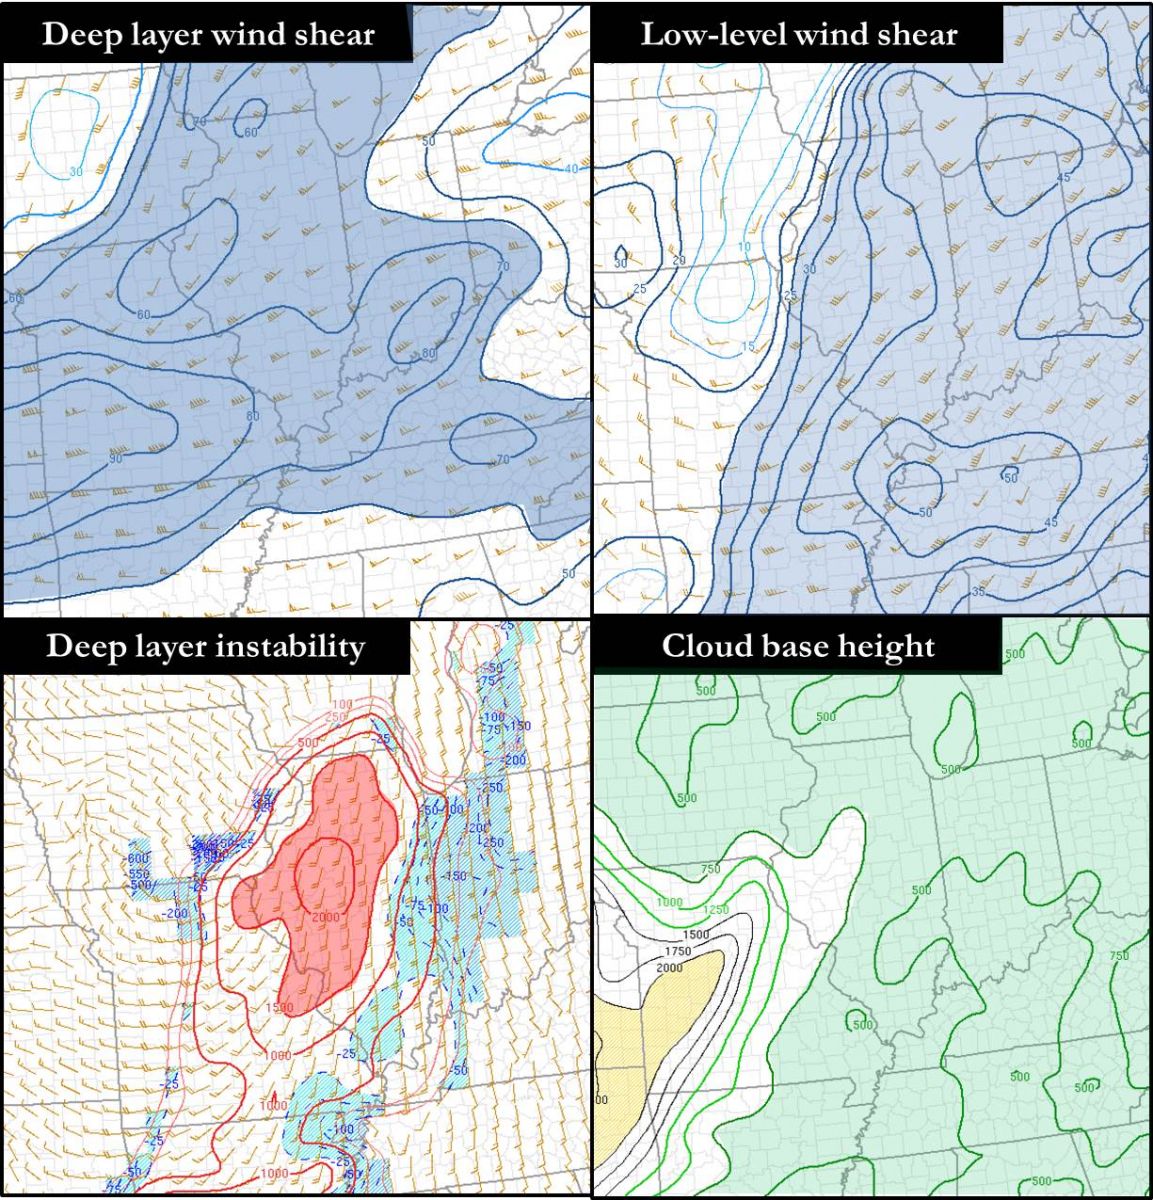 Analysis of wind shear and instability on November 17